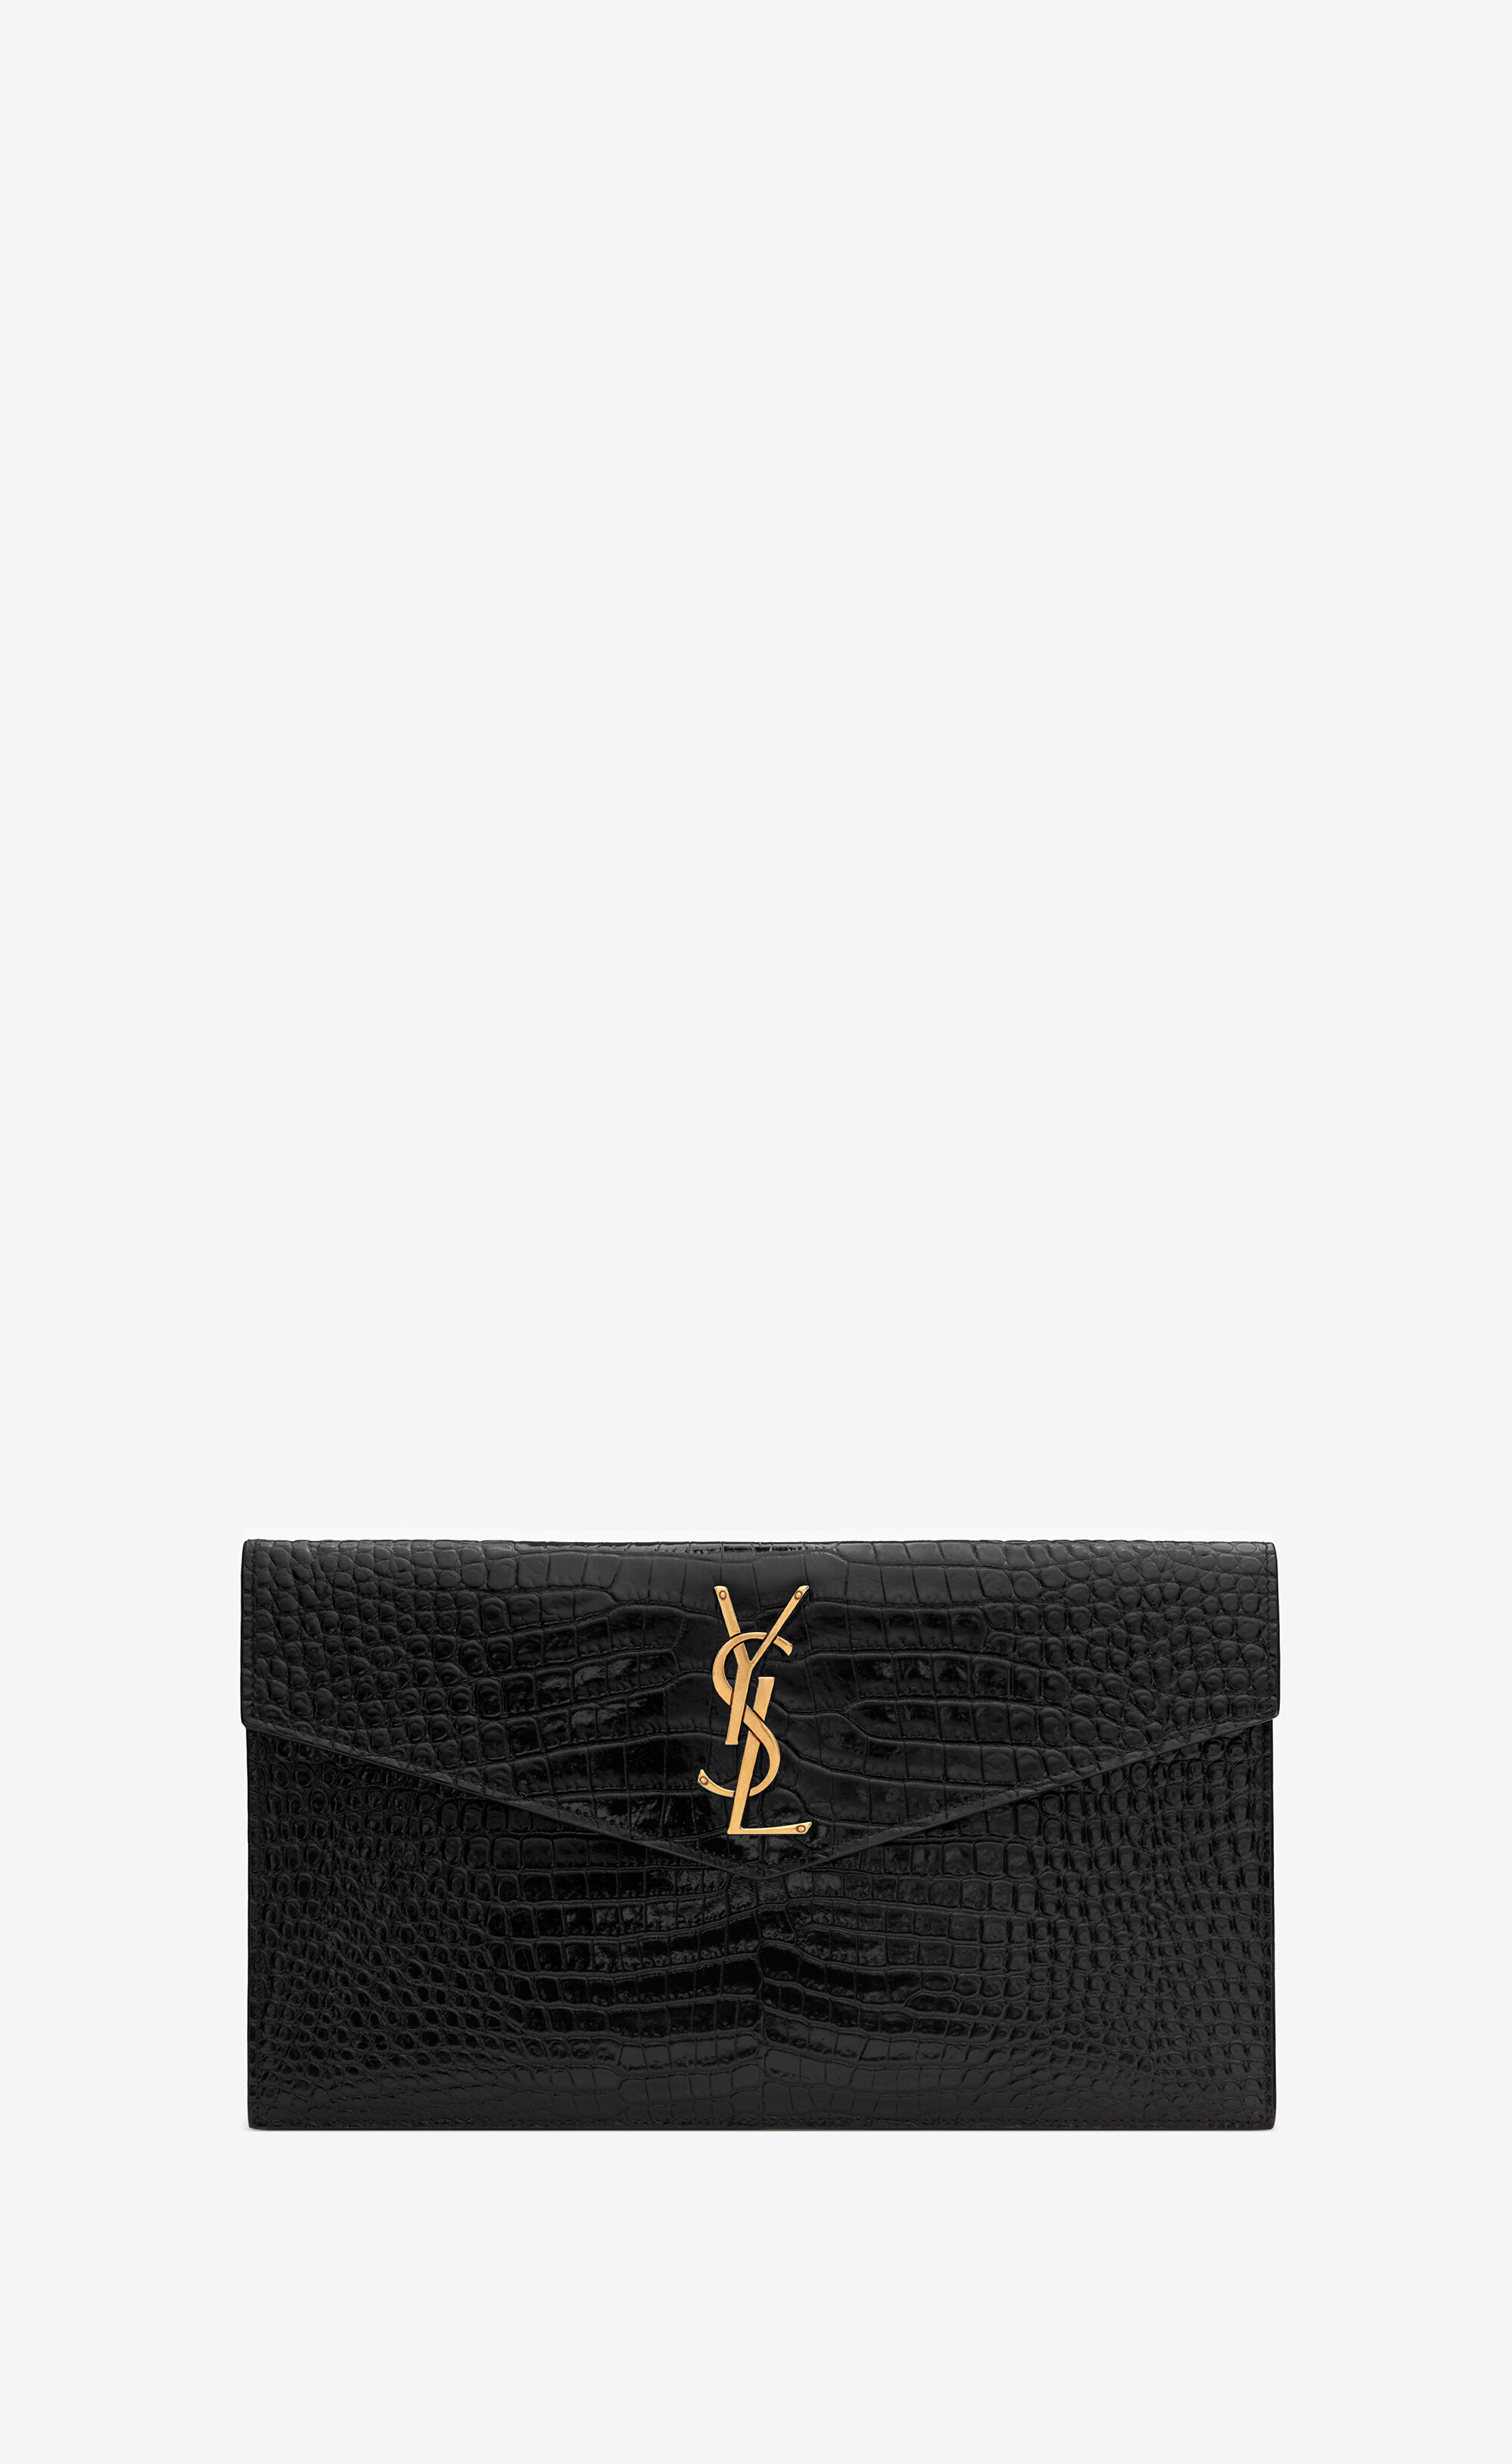 Saint Laurent Uptown Pouch in Croc-Embossed Leather with Box in 2023